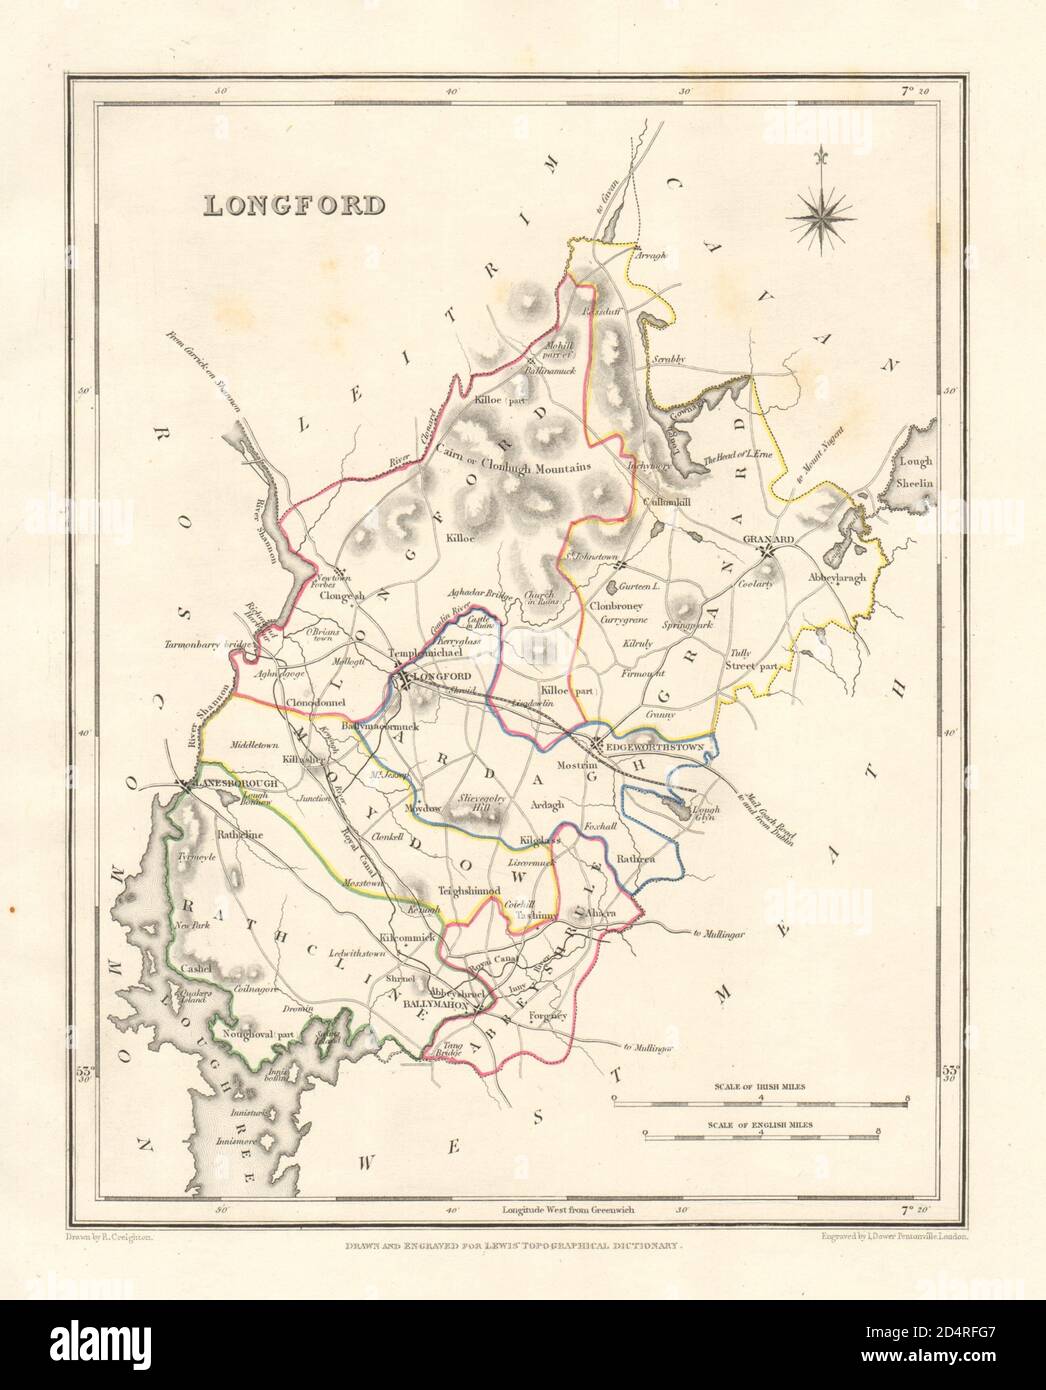 COUNTY LONGFORD antique map for LEWIS by DOWER & CREIGHTON. Ireland 1846 Stock Photo